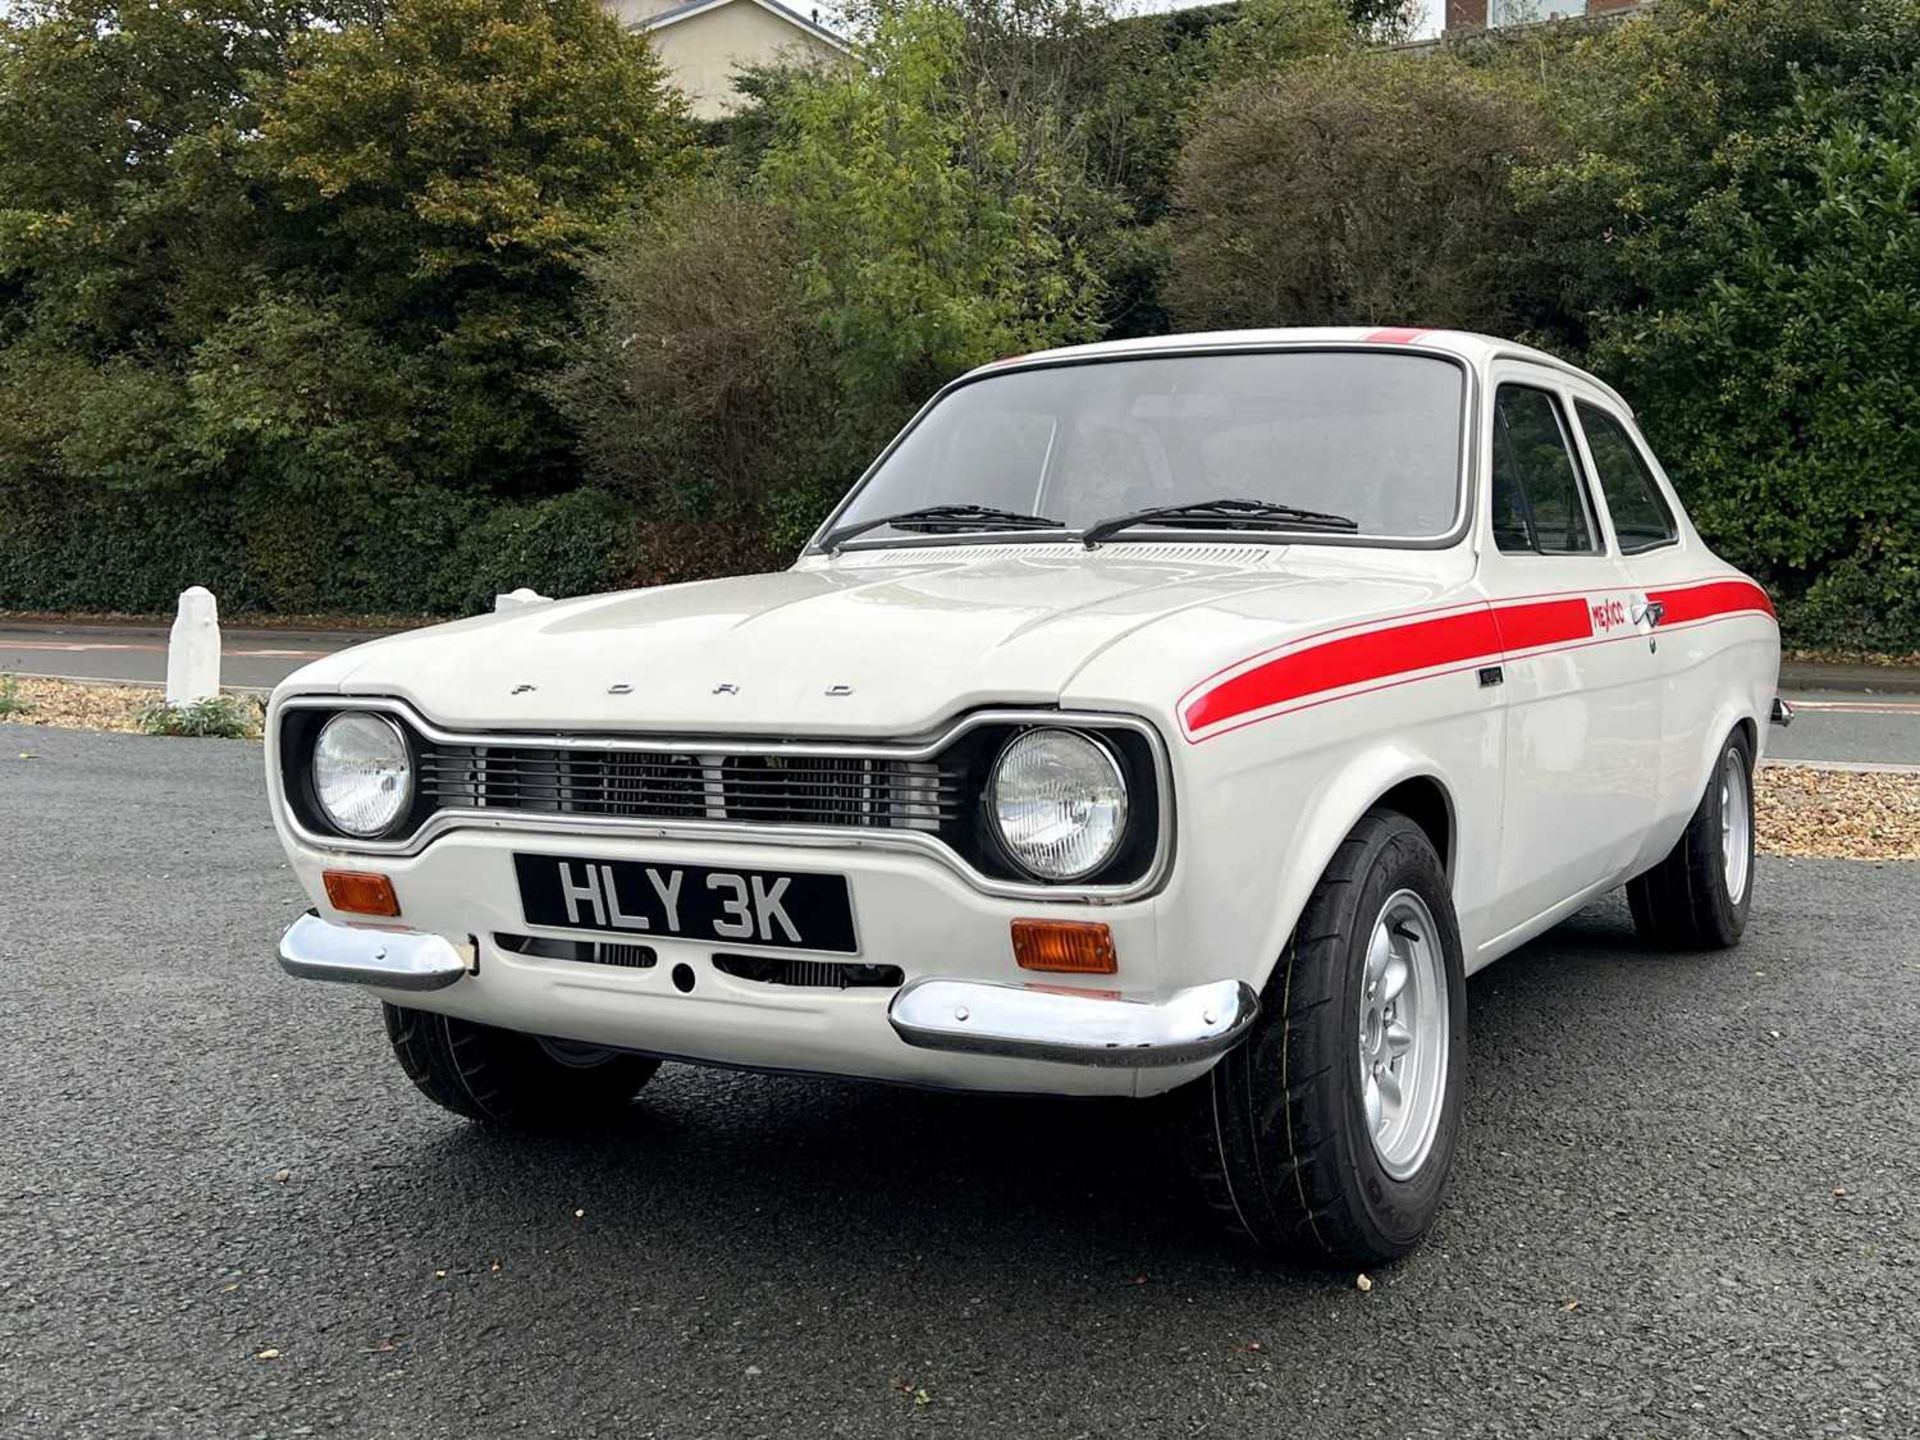 1971 Ford Escort Mexico with 2.1-litre Cosworth engine 2.1-Litre naturally aspirated Cosworth engine - Image 6 of 55